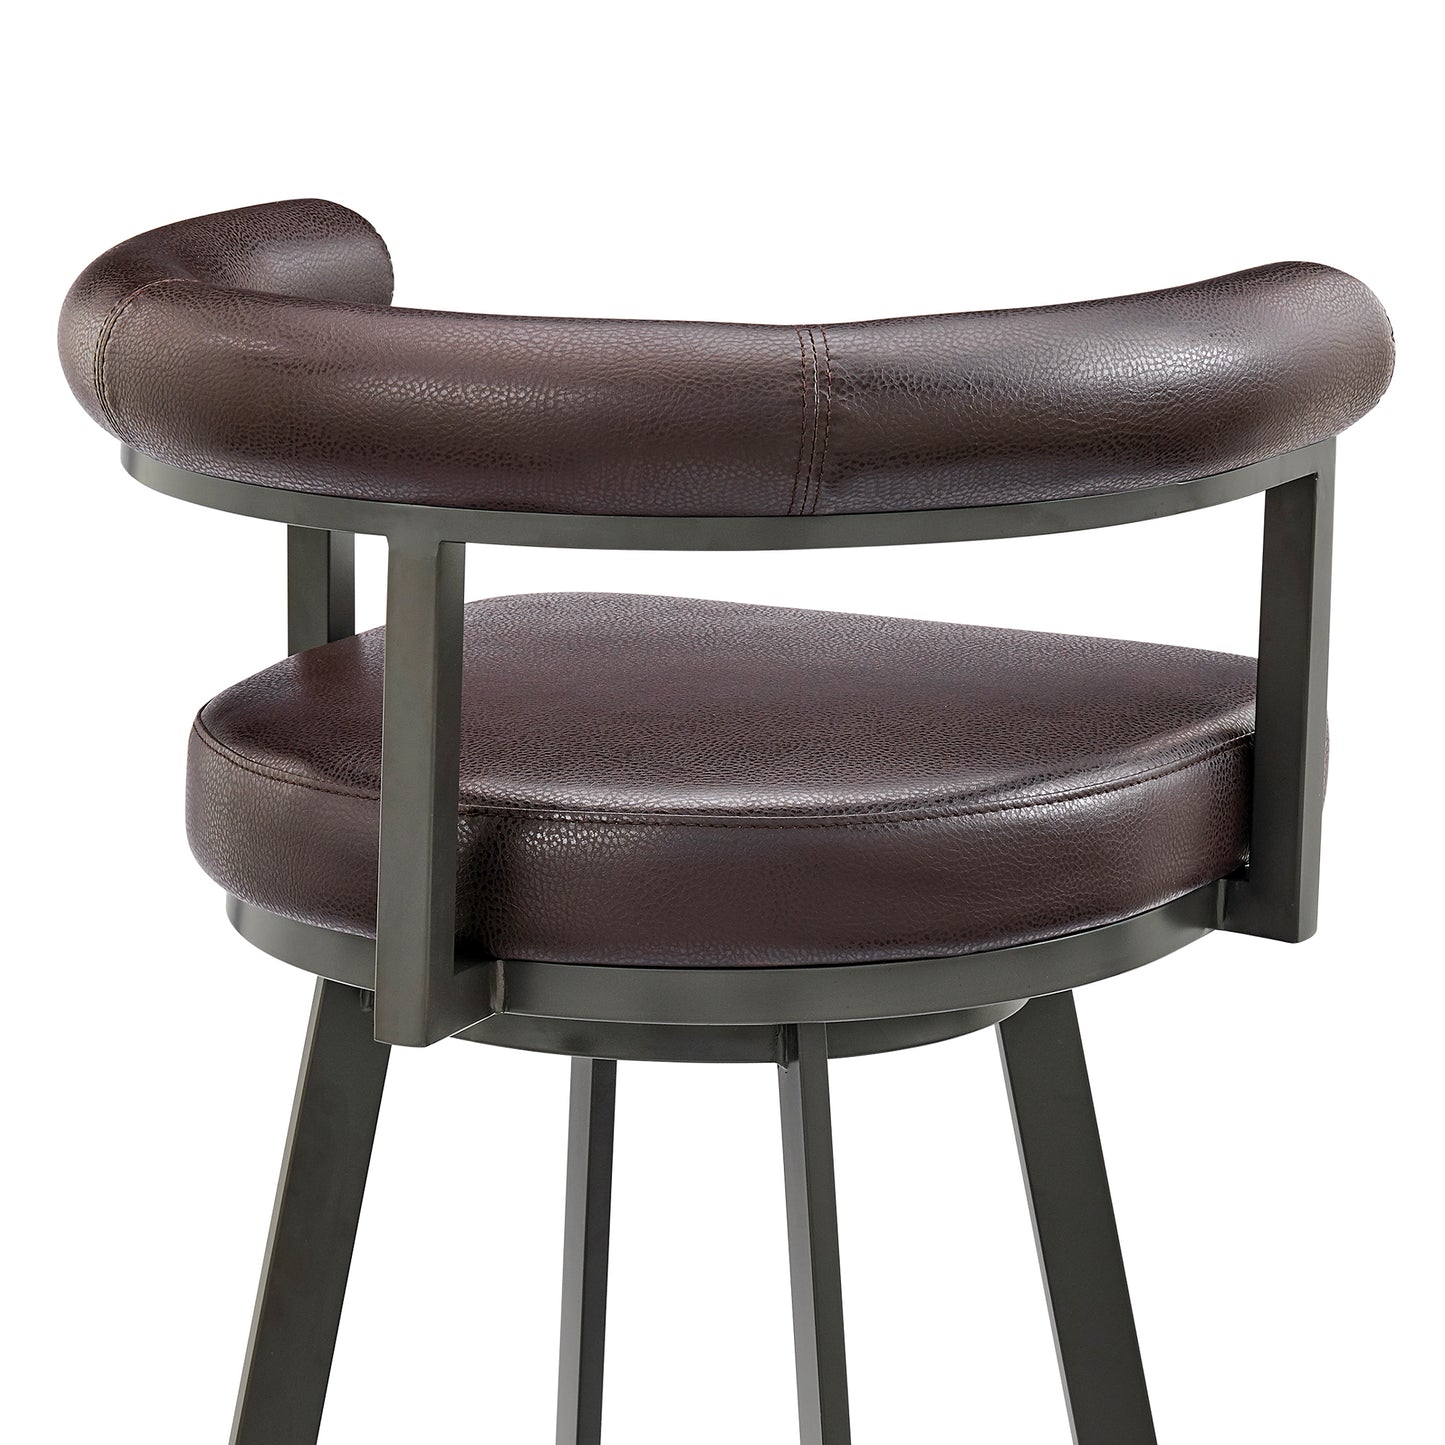 Nolagam Swivel Counter Stool in Brown Metal with Brown Faux Leather